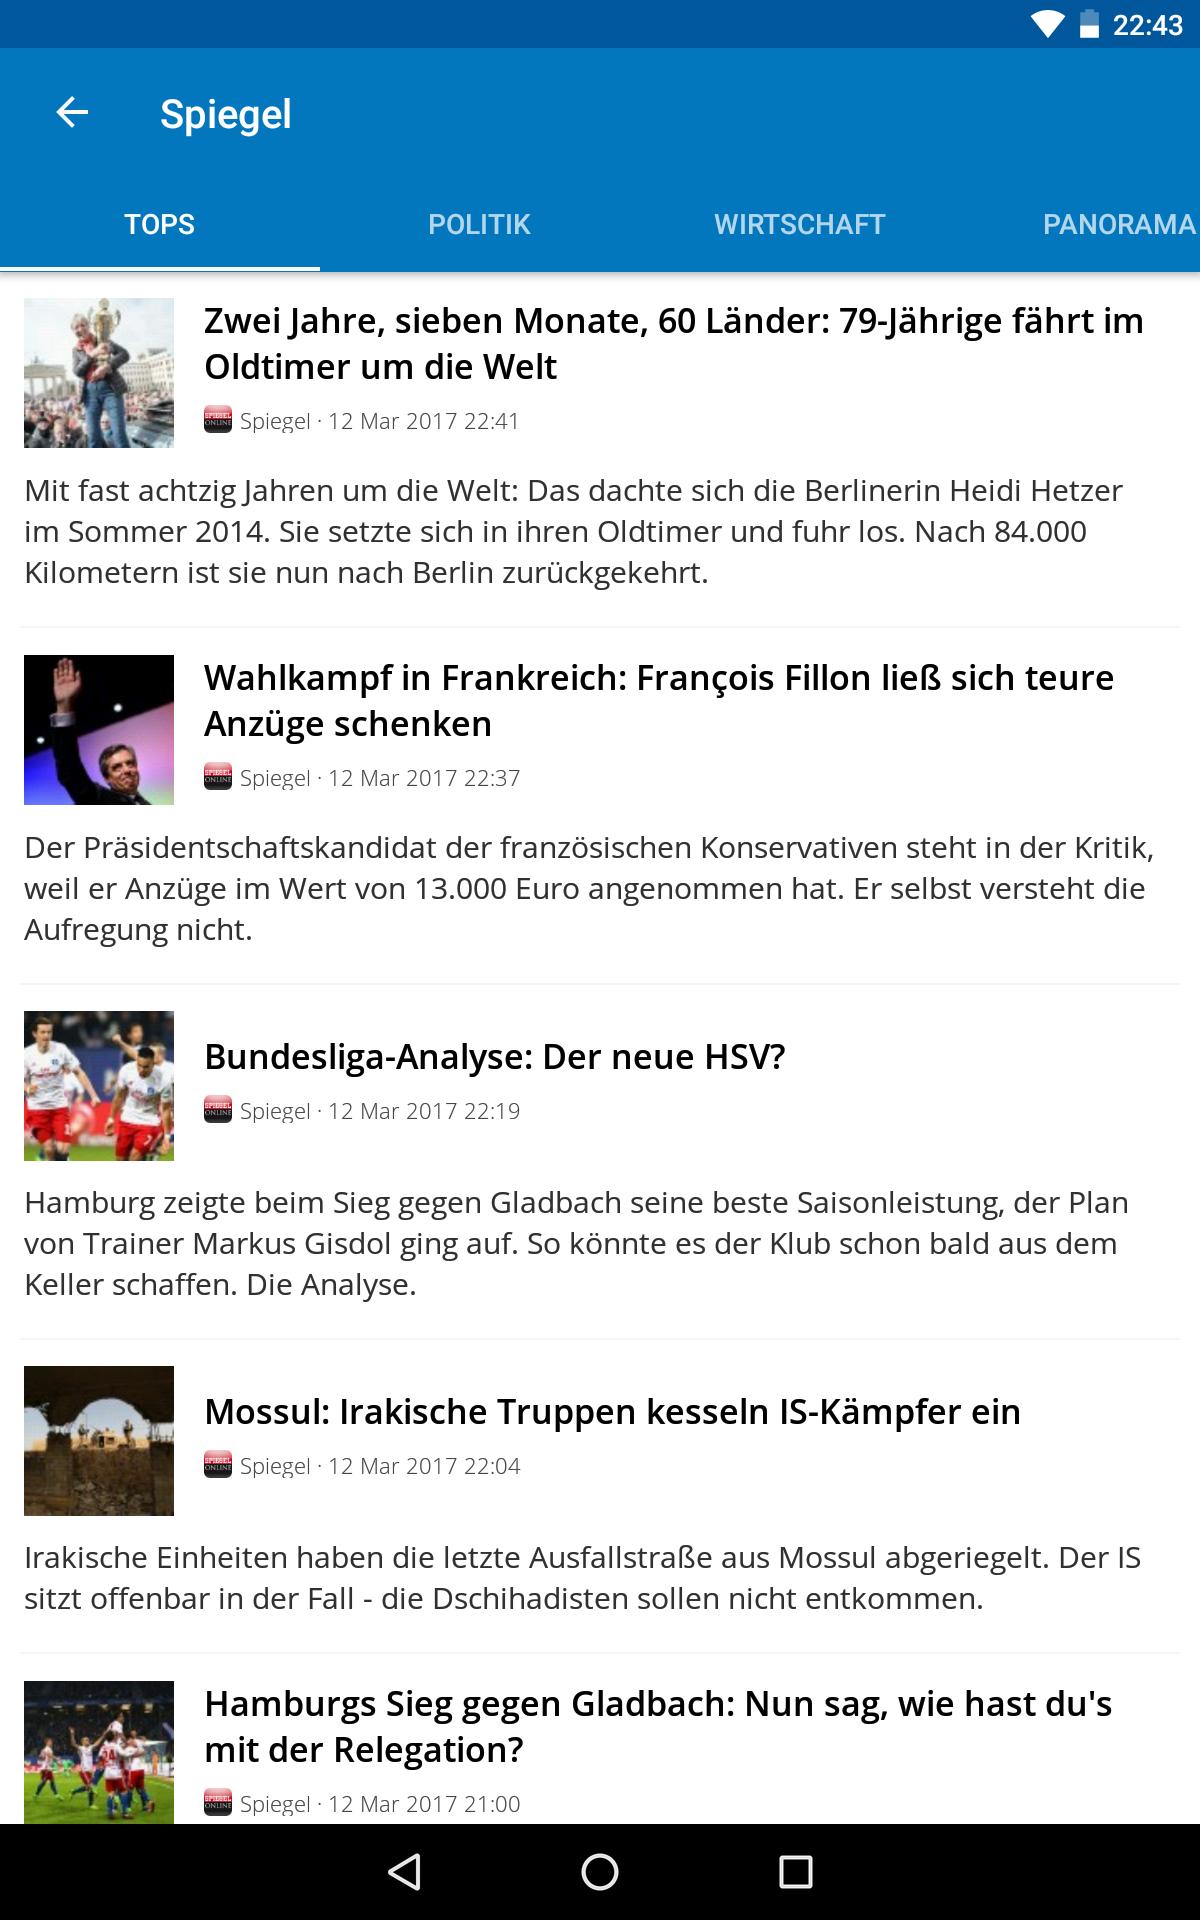 Switzerland News - Latest News for Android - APK Download